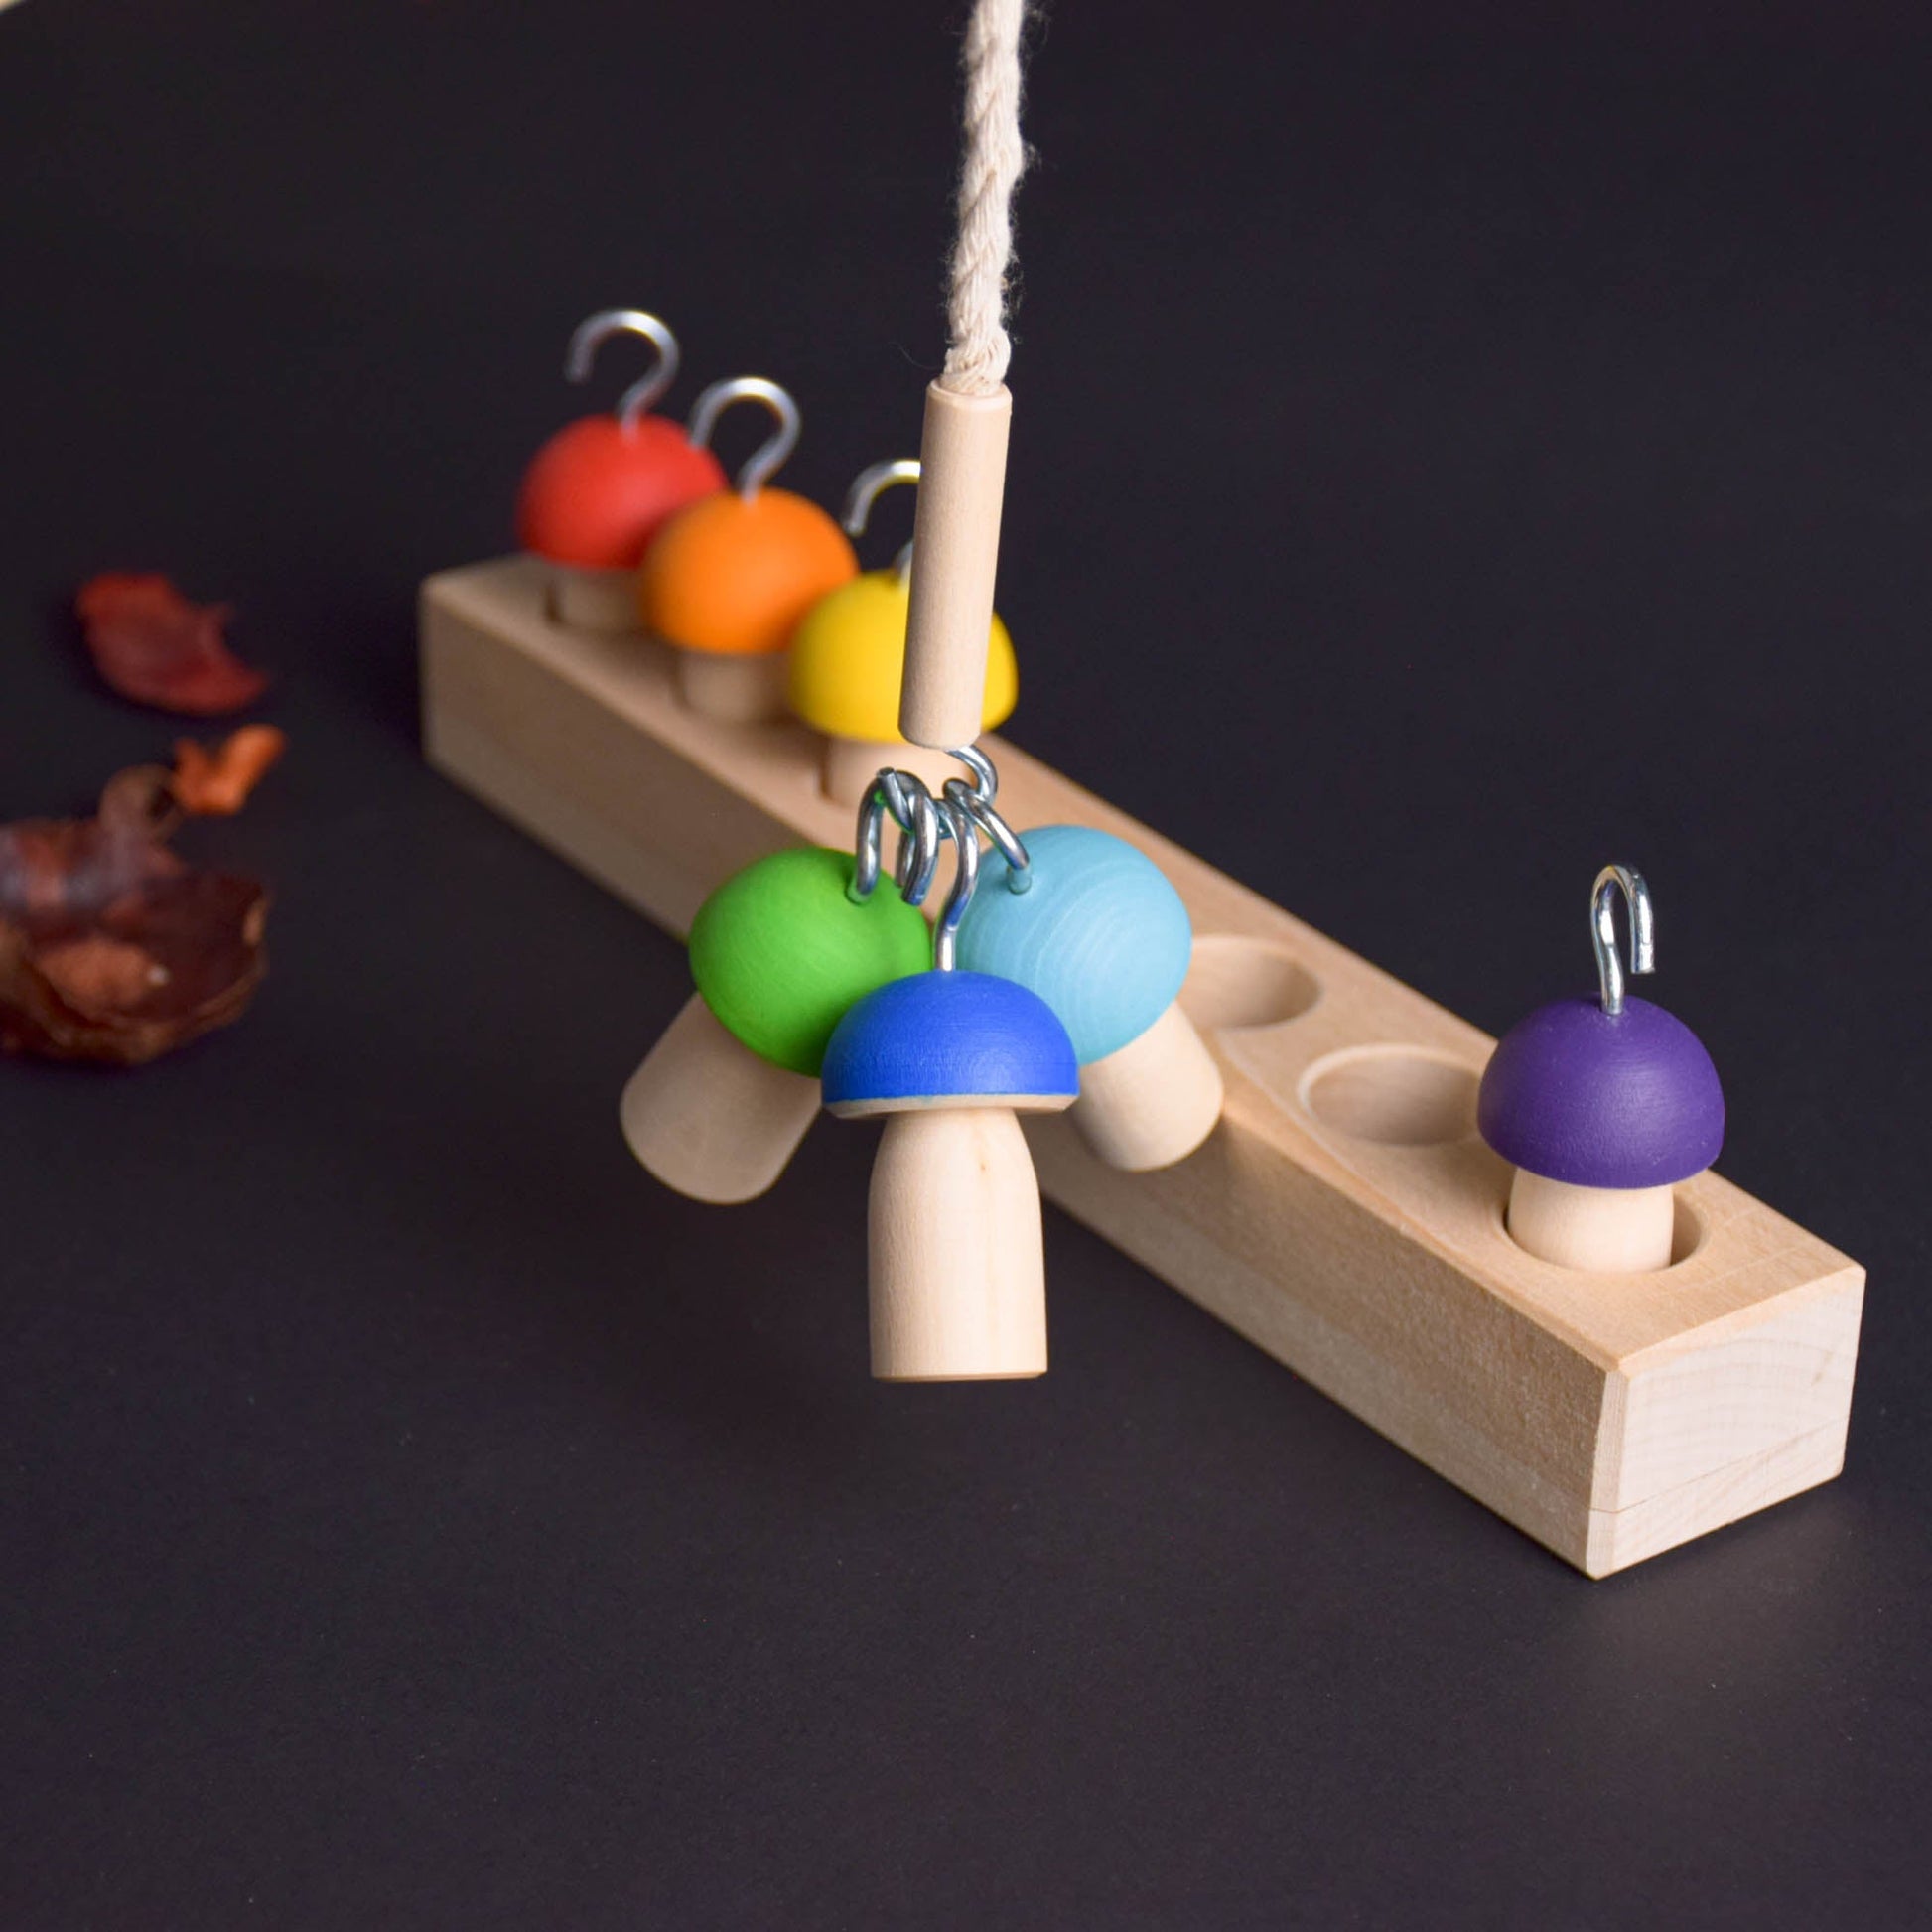 Wooden Rainbow Toy “Mushrooms On A Fishing Rod”, 59% OFF